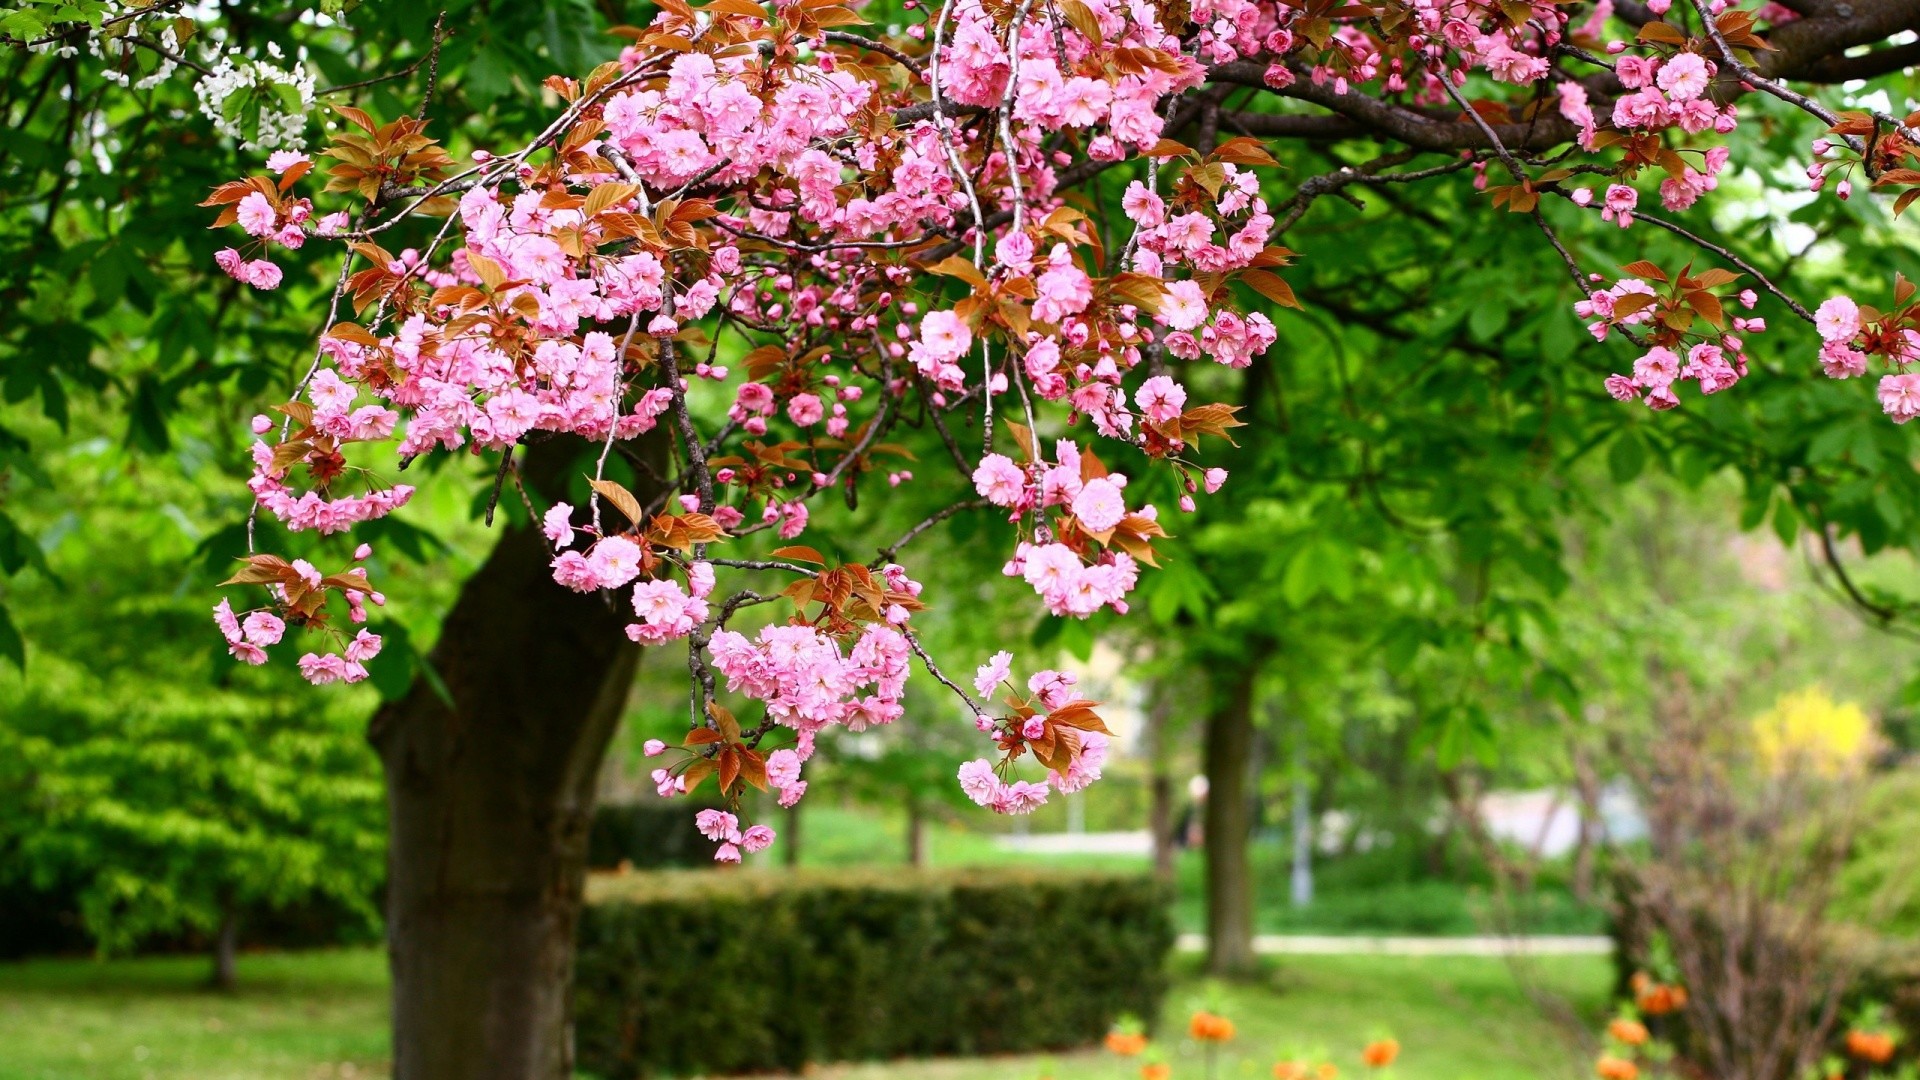 Spring Flowers Live Wallpaper Android Apps On Google Play 1920x1080